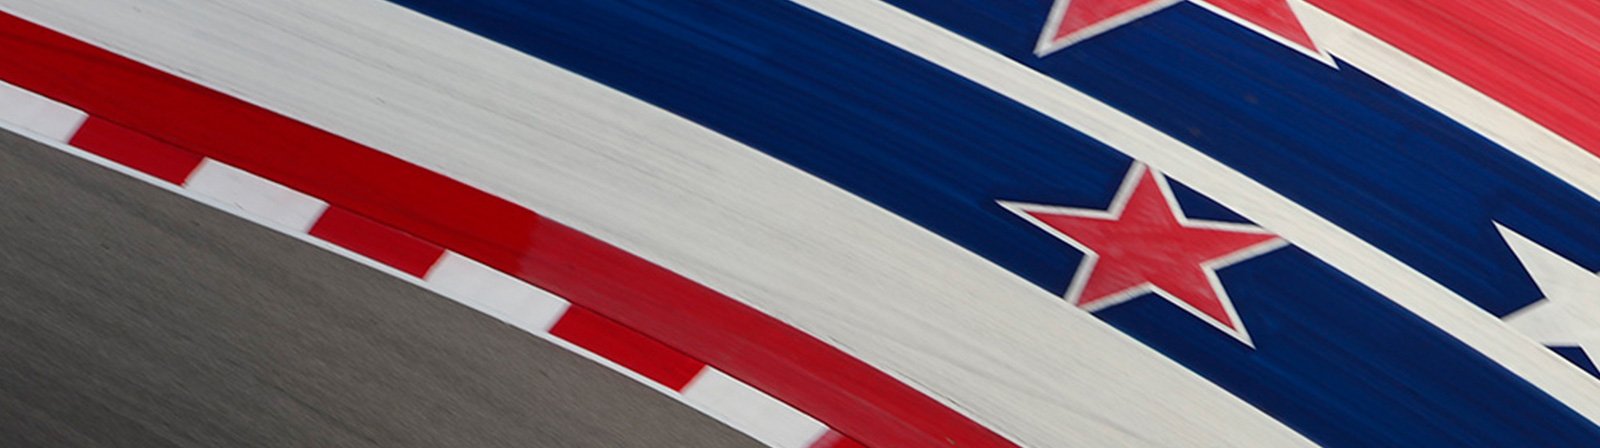 Circuit of the Americas photo